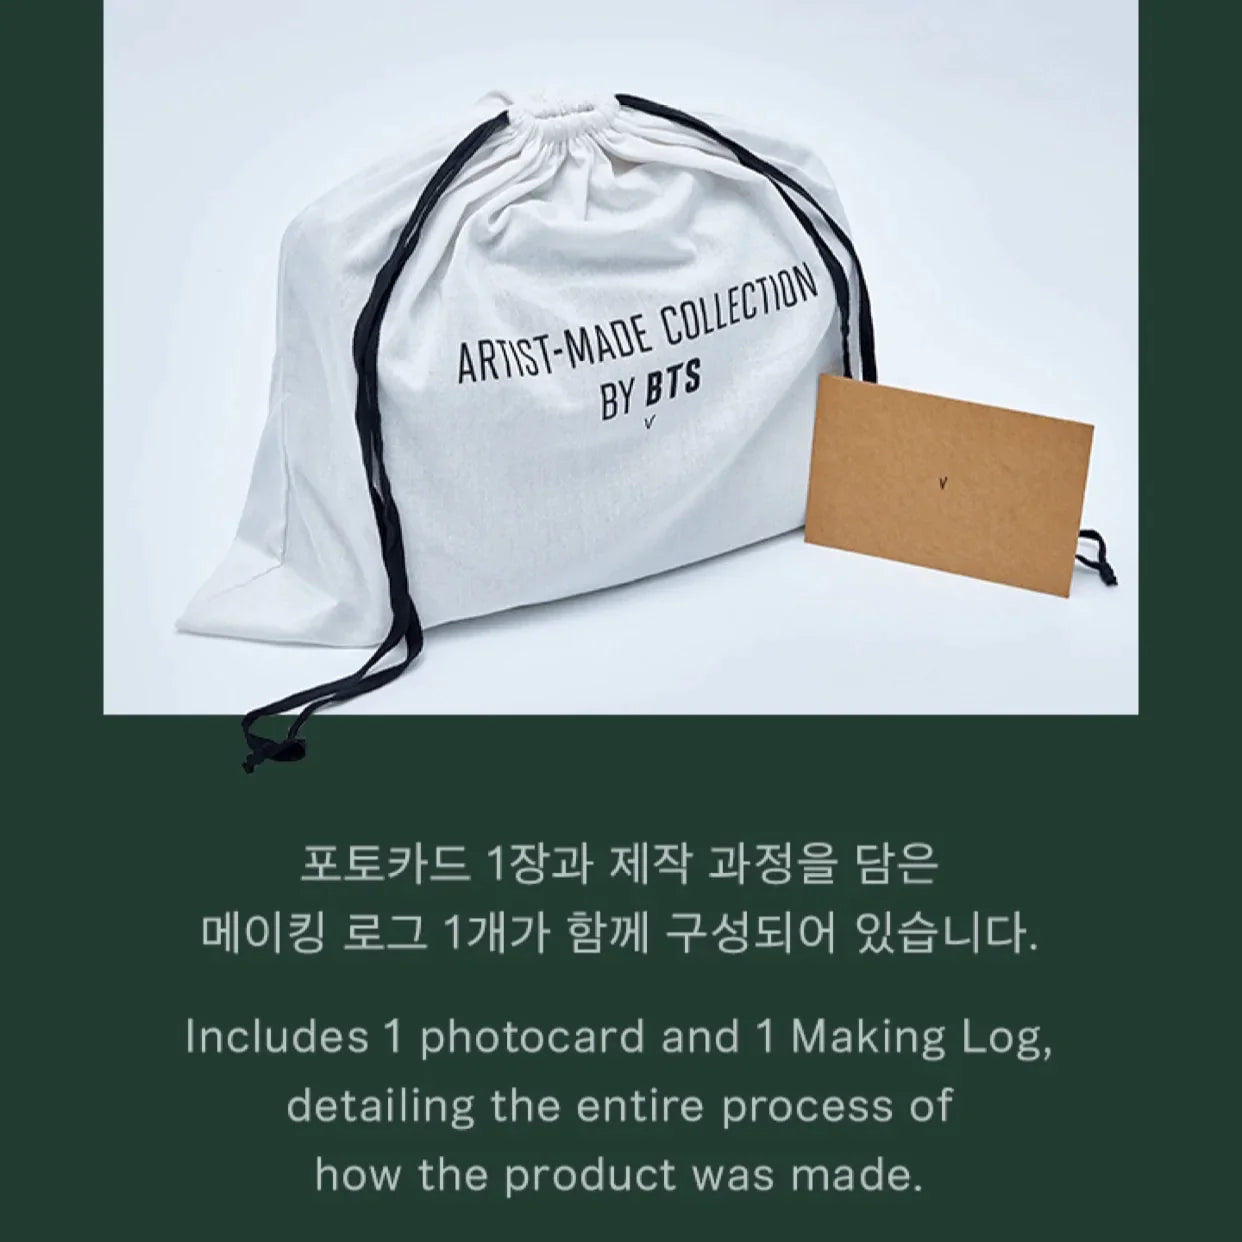 BTS V's explanation on how to use his artist-made Mute Boston Bag